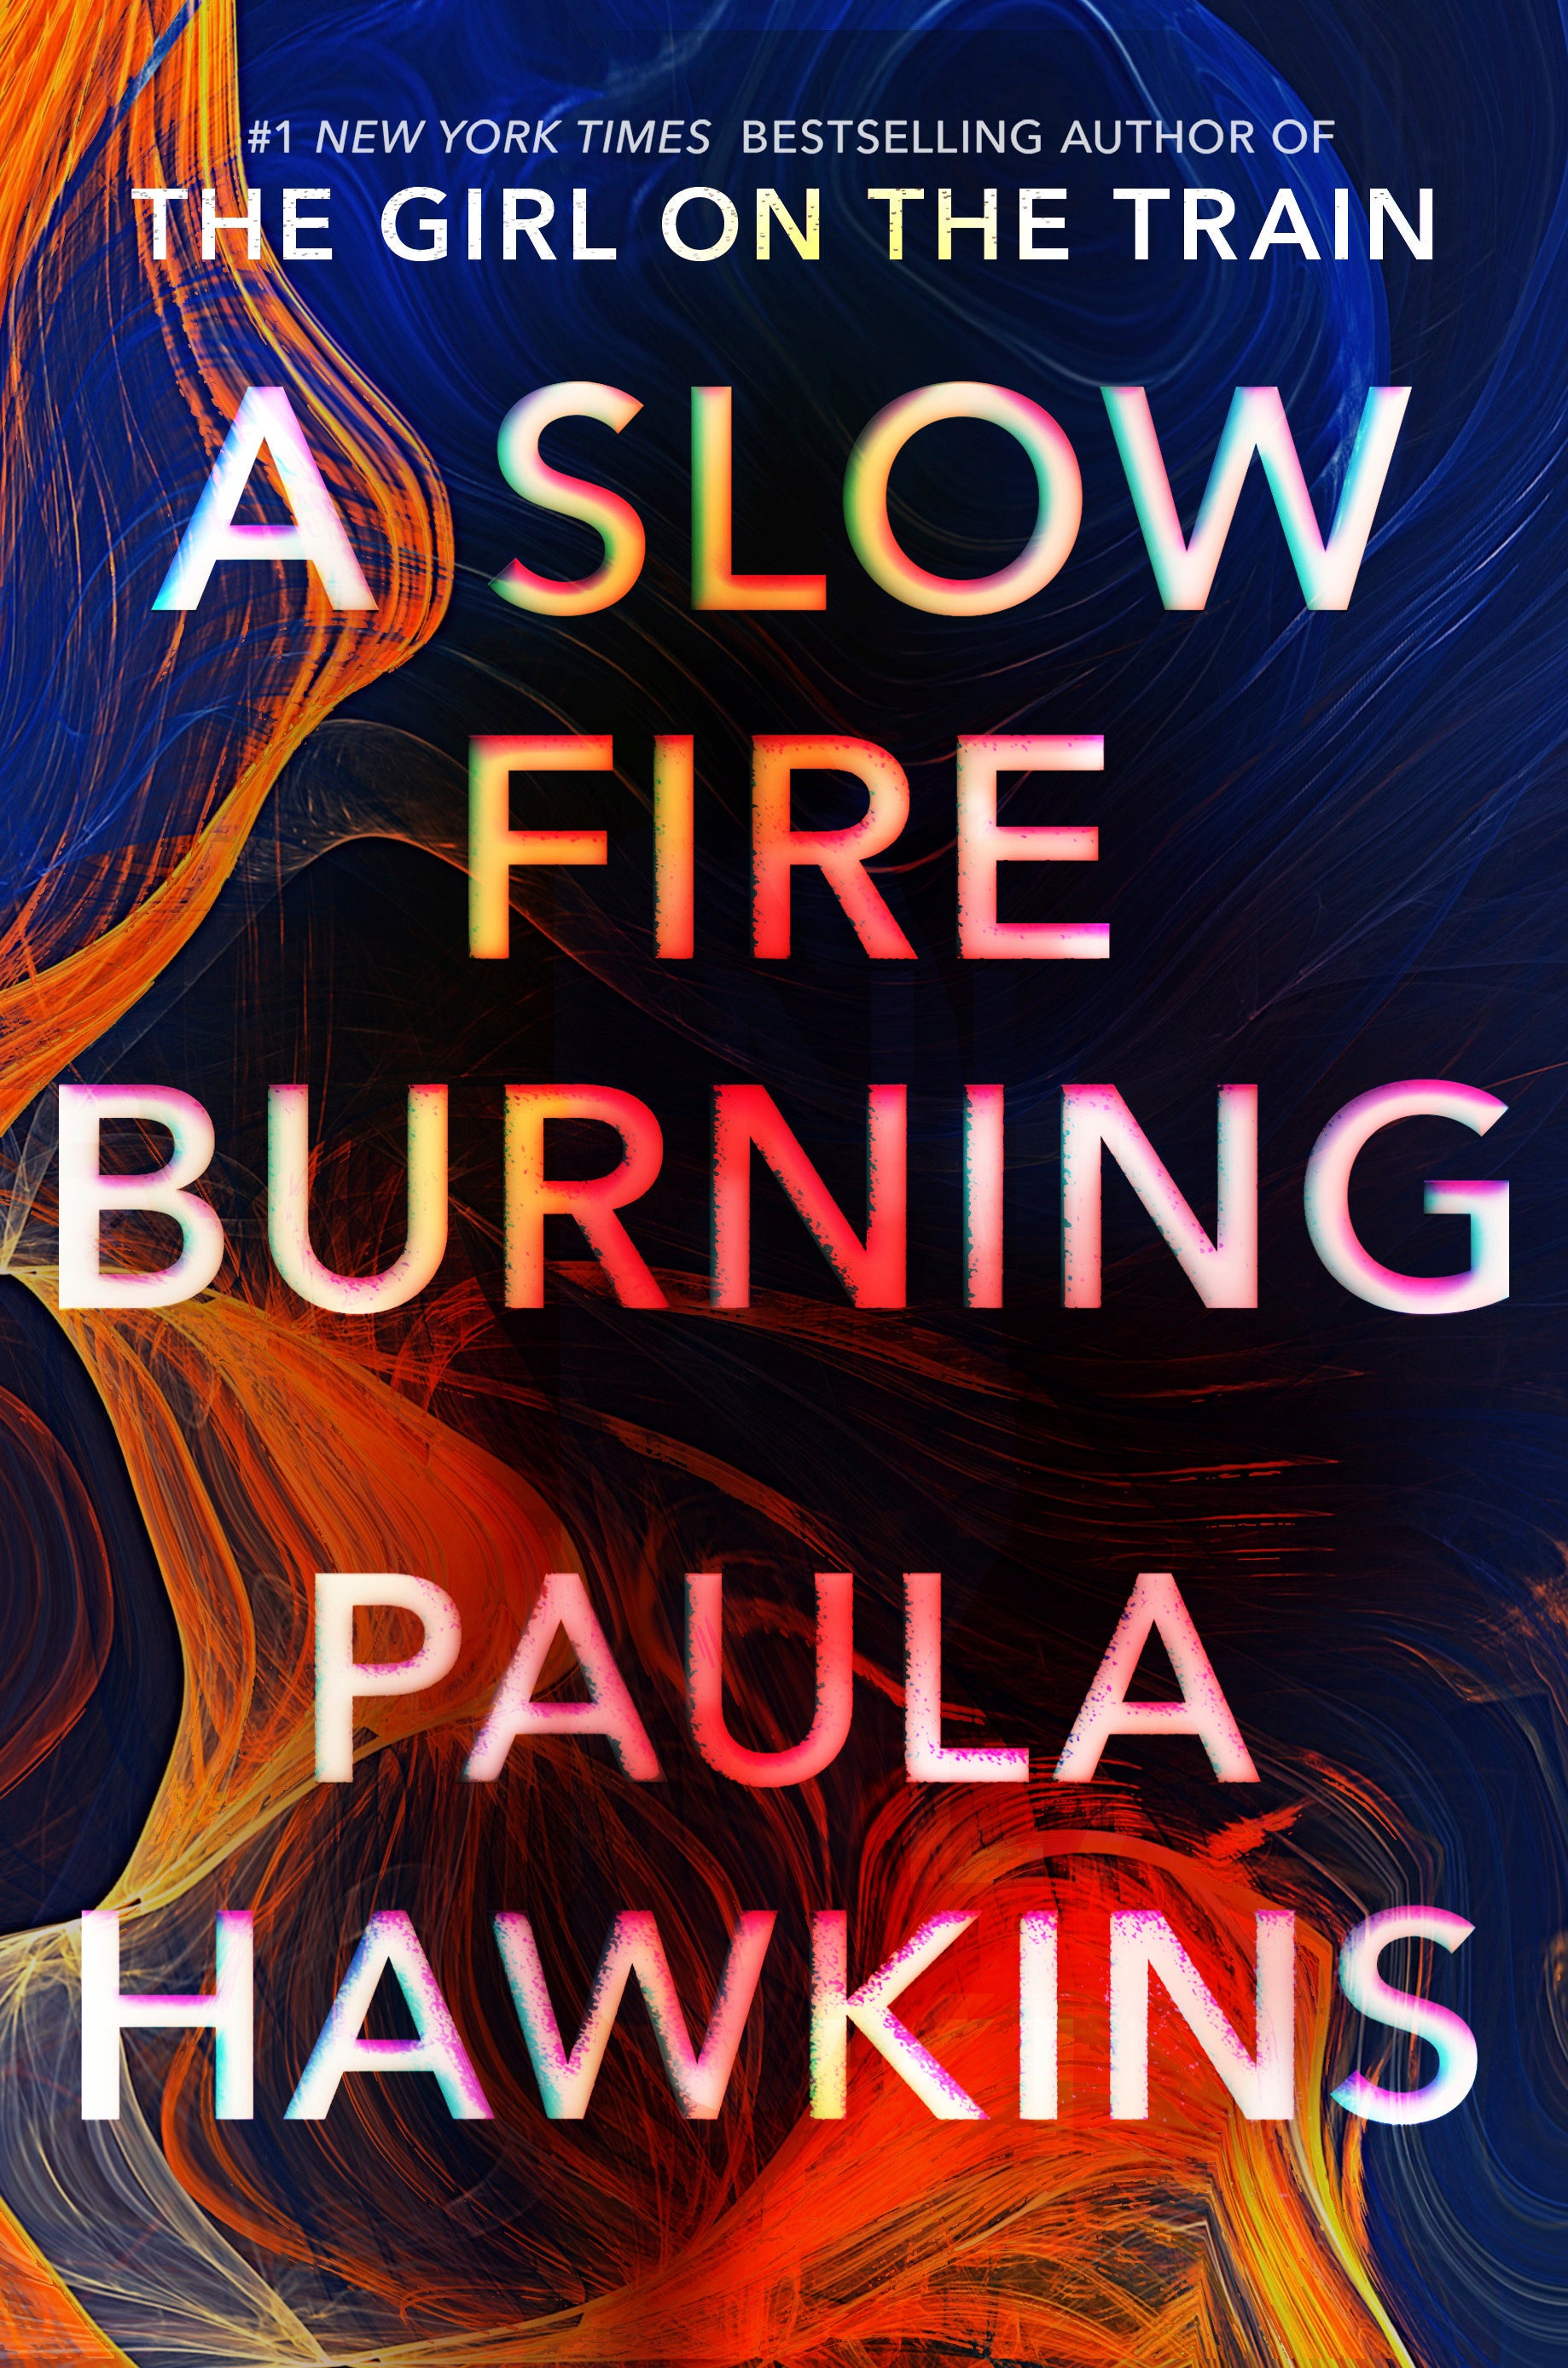 Book Review - A Slow Fire Burning